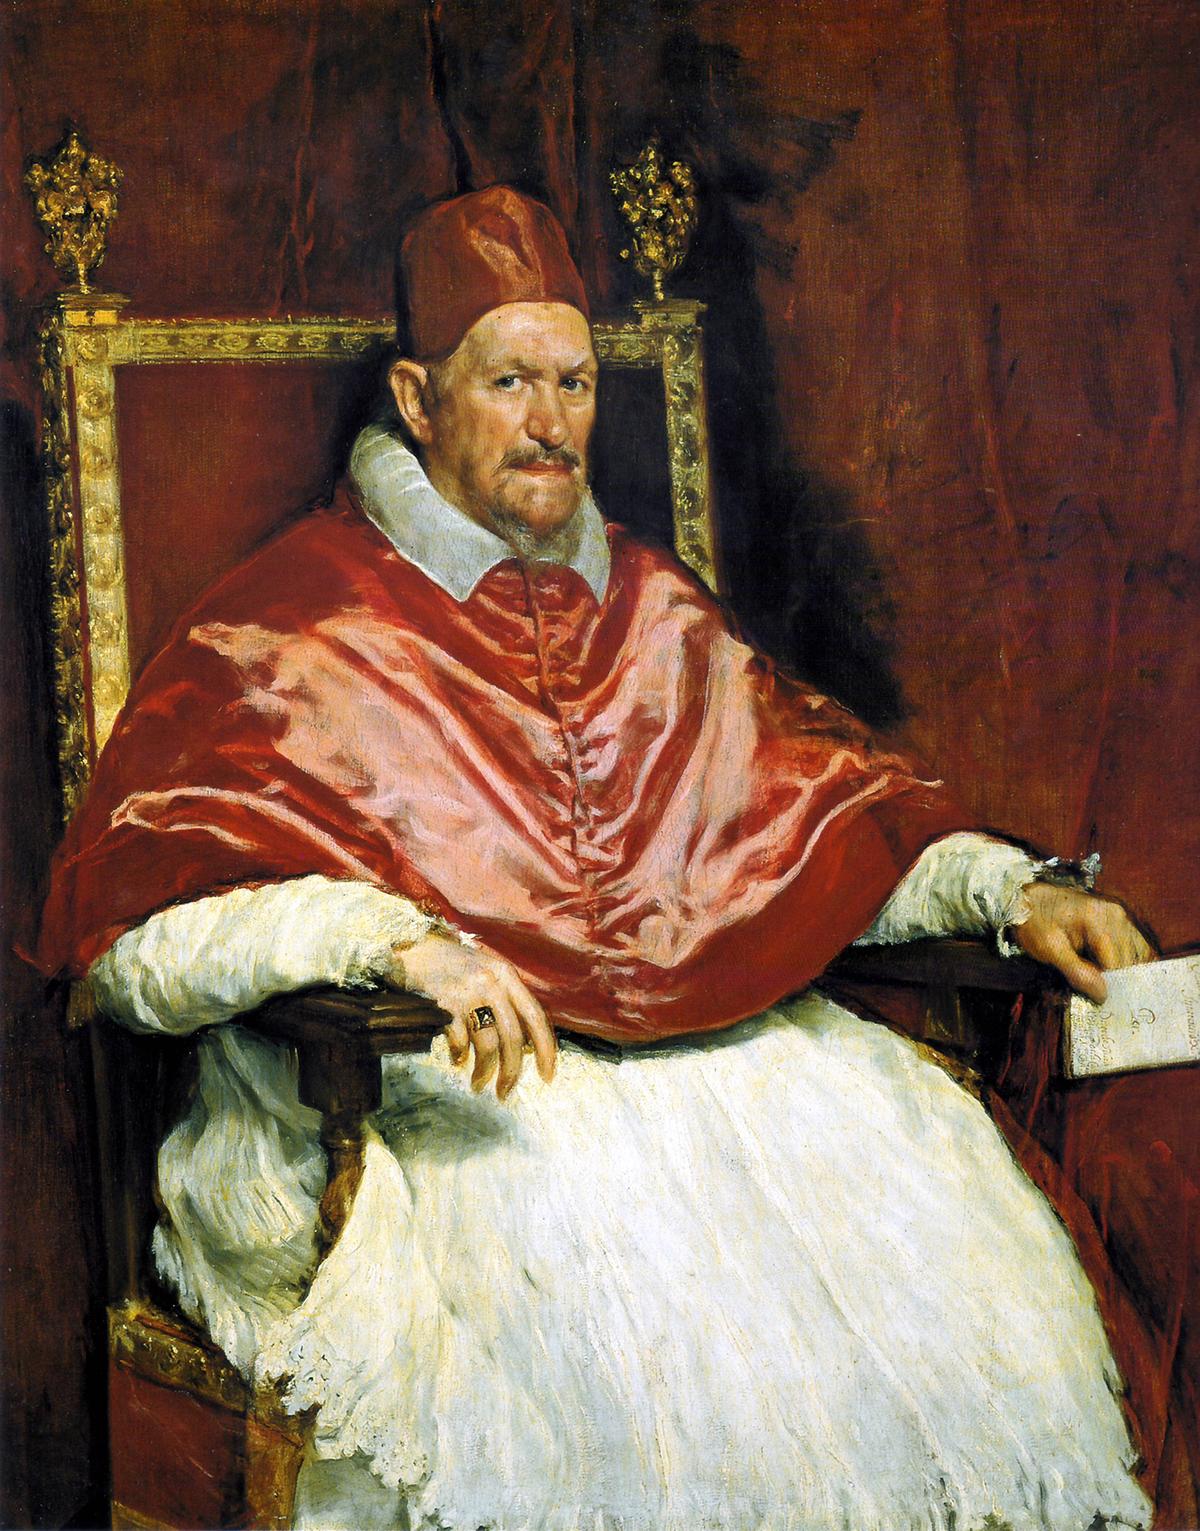 Portrait of Pope Innocent X, 1649–1650, by Diego Velázquez. Oil on canvas; 55.5 inches by 46.8 inches. Doria Pamphilj Gallery, Rome. (Public Domain)